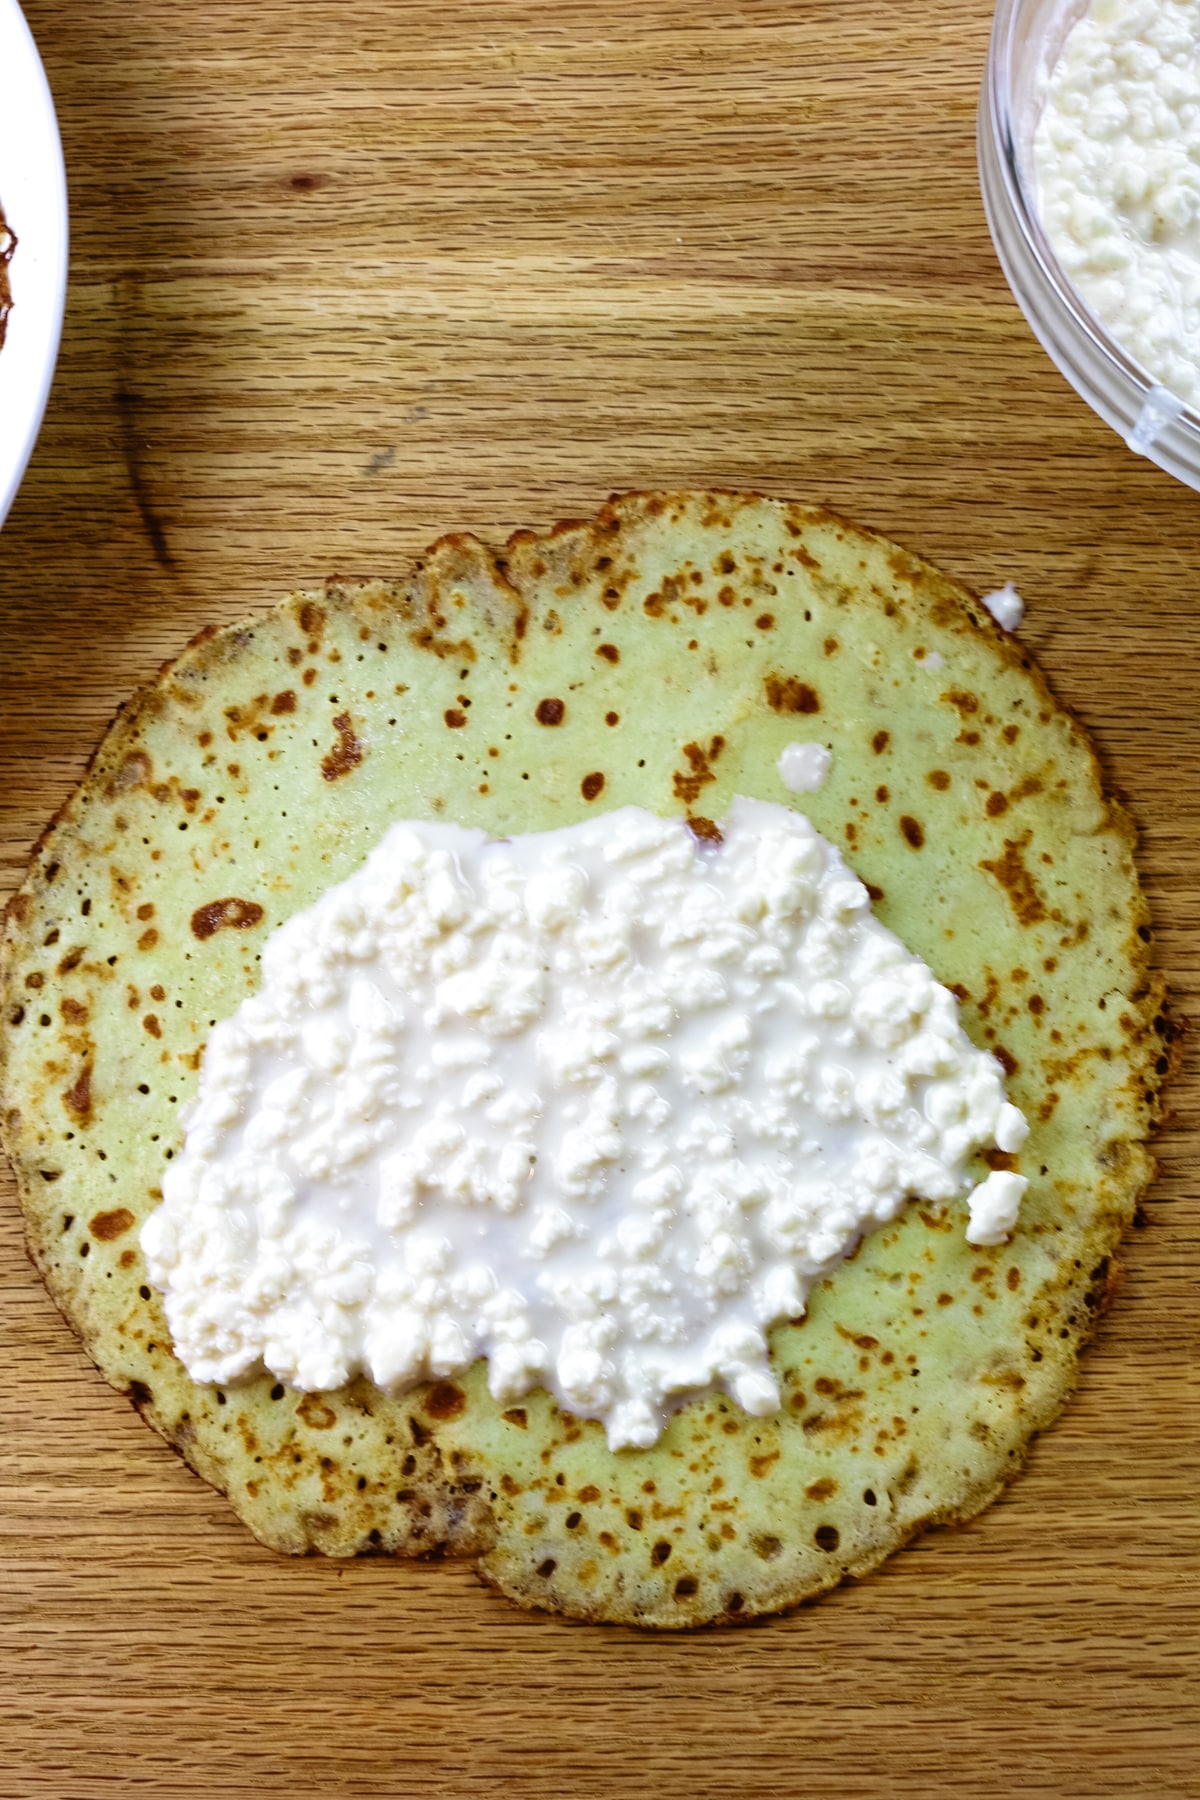 cottage cheese mixture spread on crepe.